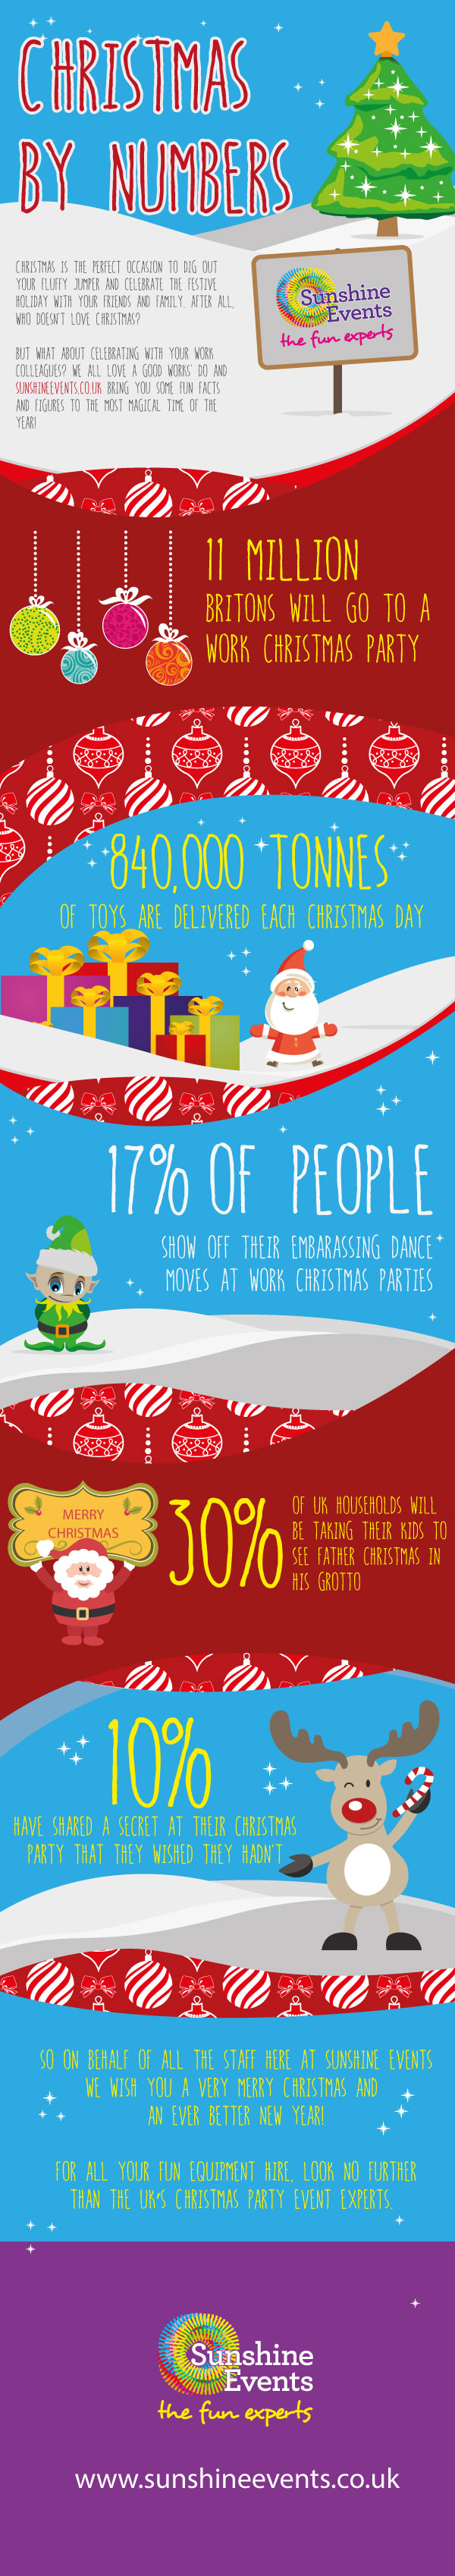 Christmas by numbers infographic